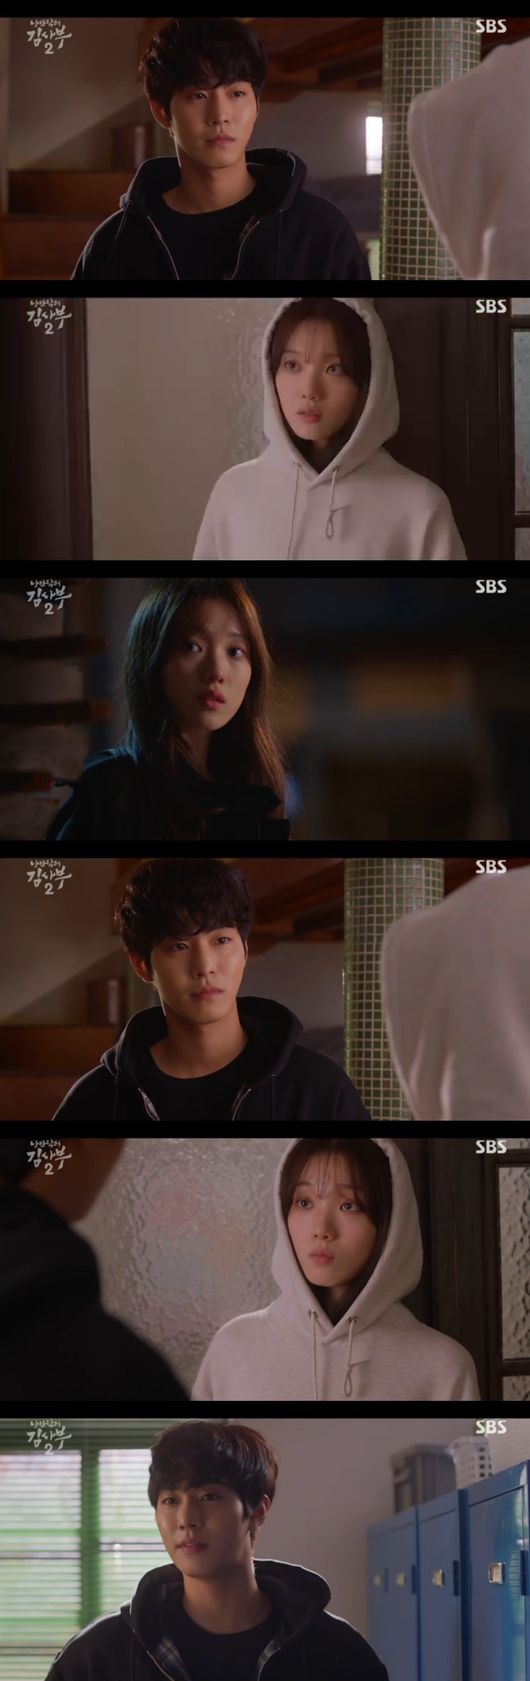 Lee Sung-kyung was in an unexpected accident in Romantic Doctor Kim Sabu Season 2 and was greeted by Danger.Can Ahn Hyo-seop save Lee Sung-kyung, who was stabbed in the neck and fell over-hemorrhage?Eun-jae (Lee Sung-kyung), who was hit by Danger due to excessive bleeding in the SBS monthly drama Romantic Doctor Kim Sabu Season 2 broadcast on the 21st, and Woojin (Ahn Hyo-seop), who jumped into the operating room to save such a silver, were announced.The emergency situation was unfolded at Doldam Hospital, where gangs with gunshot wounds gathered.Kim Sabu (Han Seok-gyu), who was in surgery, left the finishing to Woojin (Ahn Hyo-seop), and Cha Eun-jae (Lee Sung-kyung) was busy with the gangsters surgery.In the situation where the number of doctors was insufficient, the gang called Kim Sabu only, and the gang called for Kim Sabu, and the gangsters called Blackmail - Cinémix Par Chloé.Kim Sabu appeared in the situation where the gangsters and the Detectives struggled, and overpowered them. They raised their voices to the gangsters as this is a hospital, and the gangsters bowed their heads.Jang Gi-tae (Im Won-hee) arranged the Detectives and gangsters in the middle and took order.Kim Sabu directly identified the patients with gunshot wounds. At this time, an emergency situation was unfolded, and Cha Eun-jae also conveyed the situation to Kim Sabu and was enthusiastic about treatment.Jung In-soo (Yoon Na-moo) and Yoon-ae (Soo Ju-yeon) also helped him to treat the disease next to Kim Sa-bu.At this time, Park Min-guk (Kim Joo-heon) appeared in the operating room and ordered Kim Sa-bu to stop the operation.Kim said, I should move to the operating room soon, but the Republic of Korea said, Do you really have to go to surgery?I said, Take care of the patient who can not use his hand already, and take care of the patient who can save it at that time. Kim ignored this and ordered the patient to move to the operating room, and instructed him to prevent the bleeding of the patient only until he moved the operating room.Eun-jae, with the trust of his master, shouted, I can do it.The gang suddenly appeared to the silver, saying, If anything happens to my brother, then you die and I die. Blackmail - Cinémix Par Chloé.Eun-jae held his fist and performed the surgery in a spleen manner, saying, Beware.I was worried that Kim Sabu could do it, said Eun Jae. I am afraid of Professor Park Min-guk, but my shooter at Doldam Hospital is Kim Sabu and now Kim Sabu are the first.While all of them were nervous and watching, Eunjae prayed that he was please. Kim Sabu, who was in the process of other surgery, believed that Eunjae would do it to the end.Eun Jae has undergone a difficult opening surgery, and Eun Jae has successfully completed the surgery, saying, I think it will be.Kim Sabu praised Eun Jae as good, and Eun Jae was delighted with his confident appearance, saying, If I do it, I do not have any trouble.After the surgery, the gangsters came suddenly, and thanked the boss who saved him, saying, Thank you.In the past, Eun-jae recalled memories with Bae Moon-jung (Shin Dong-wook), a senior at school.Bae Moon-jung told Eun-jae, When do you want to buy a cup of rice? And Eun-jae showed a thrill to such a boat.Woojin went back to the patient who had traumatized him, saving him with the responsibility and obligation of being a doctor, but the patient said, Why did you save me?Woojin said, If you die like this, you will not know what you have done. Stick with your family, do not laugh, do not wield violence against powerless children and kill them, do not excuse your life, you are just a weak and bad person.He said, I am sick and sick for a lifetime, so I will pay for it, so it will be fair to the dead child.The gangs came back to Doldam Hospital and visited Woojin, who followed them in a car the next day after sneaking behind Woojin, who was working out the morning.At the same time, the silver that drove out the morning walk, the moment the gang tried to hit Woojin by car, the silver saved Woojin from the amazing timing.Eun-jae noticed the strange aura and noticed that it was a gangster who came to Woojin.Asked Woojin if he was receiving Blackmail – Cinémix Par Chloé, he said he saw the gangs doing Blackmail – Cinémix Par Chloé.Eunjae told Ushijima the Loan Shark vendors to report to the police, but Woojin turned around saying, Its not your business.Eun-jae was worried, This is a criminal act, do I do it for you?Woojin looked at such silver and asked, Do you like me? Or do not go out, I will do my job, and I will do my job. Woojin has been suffering endlessly from the Ushijima the Loan Shark who keep on the phone and Blackmail – Cinémix Par Chloé.She witnessed the families of the patients who had wielded domestic violence. She pushed the silver into the fire.The victim, who was domestically violent, looked at her husband and raised a Carter knife, and the silver that dried it was attacked by a knife.A silver that fell down with a lot of blood from his neck, and Woojin rushed to find such a silver, immediately instructed him to treat and informed him of the emergency.Romantic Doctor Kim Sabu 2 captures the broadcast screen